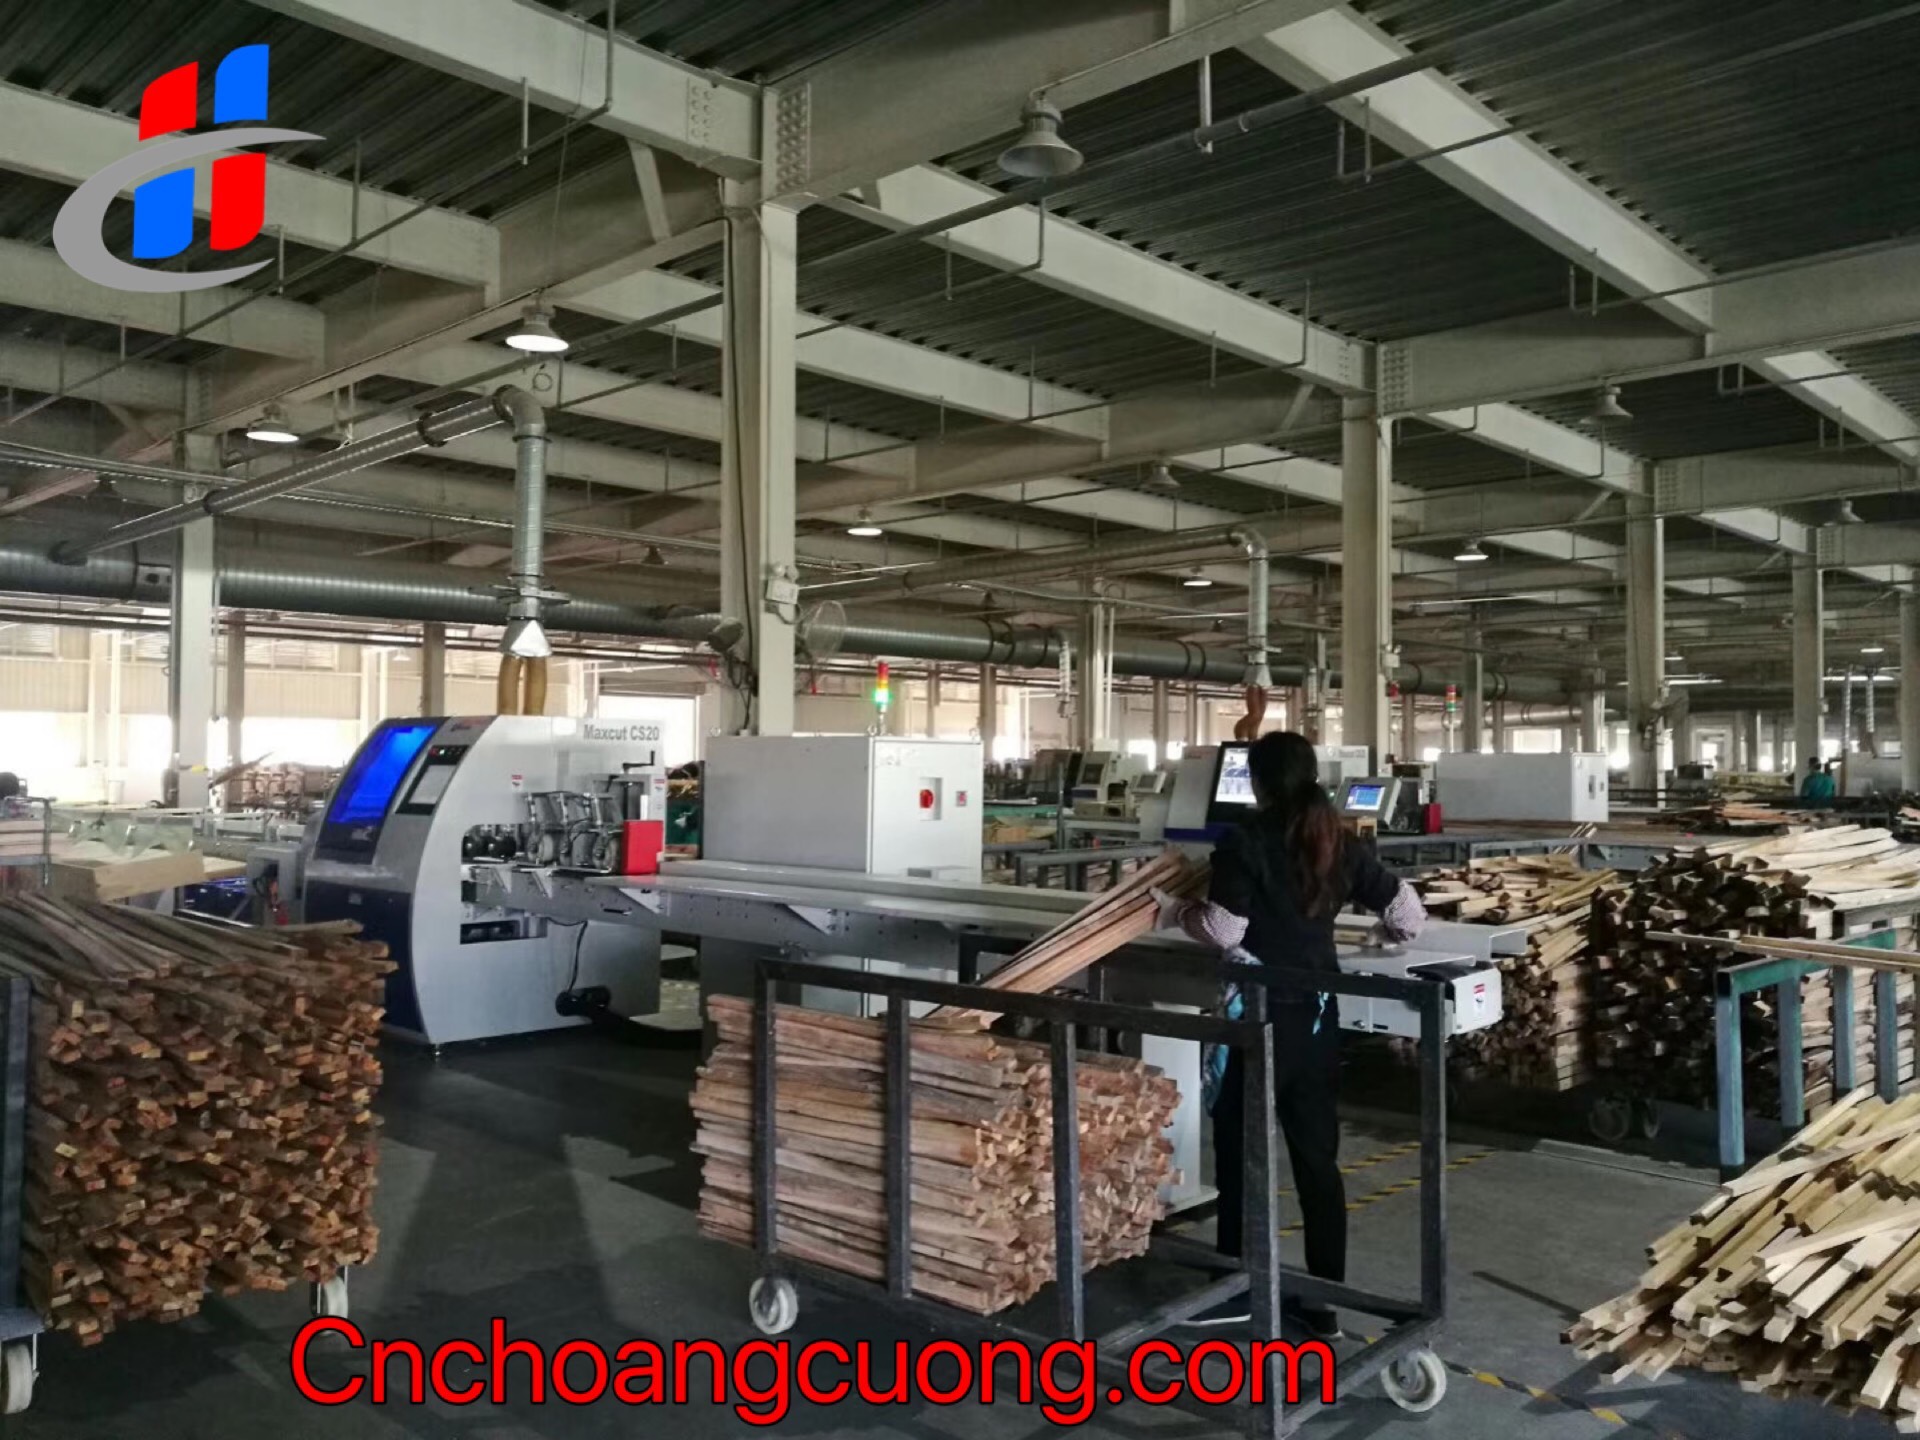 https://cnchoangcuong.com/?post_type=product&p=1232&preview=true